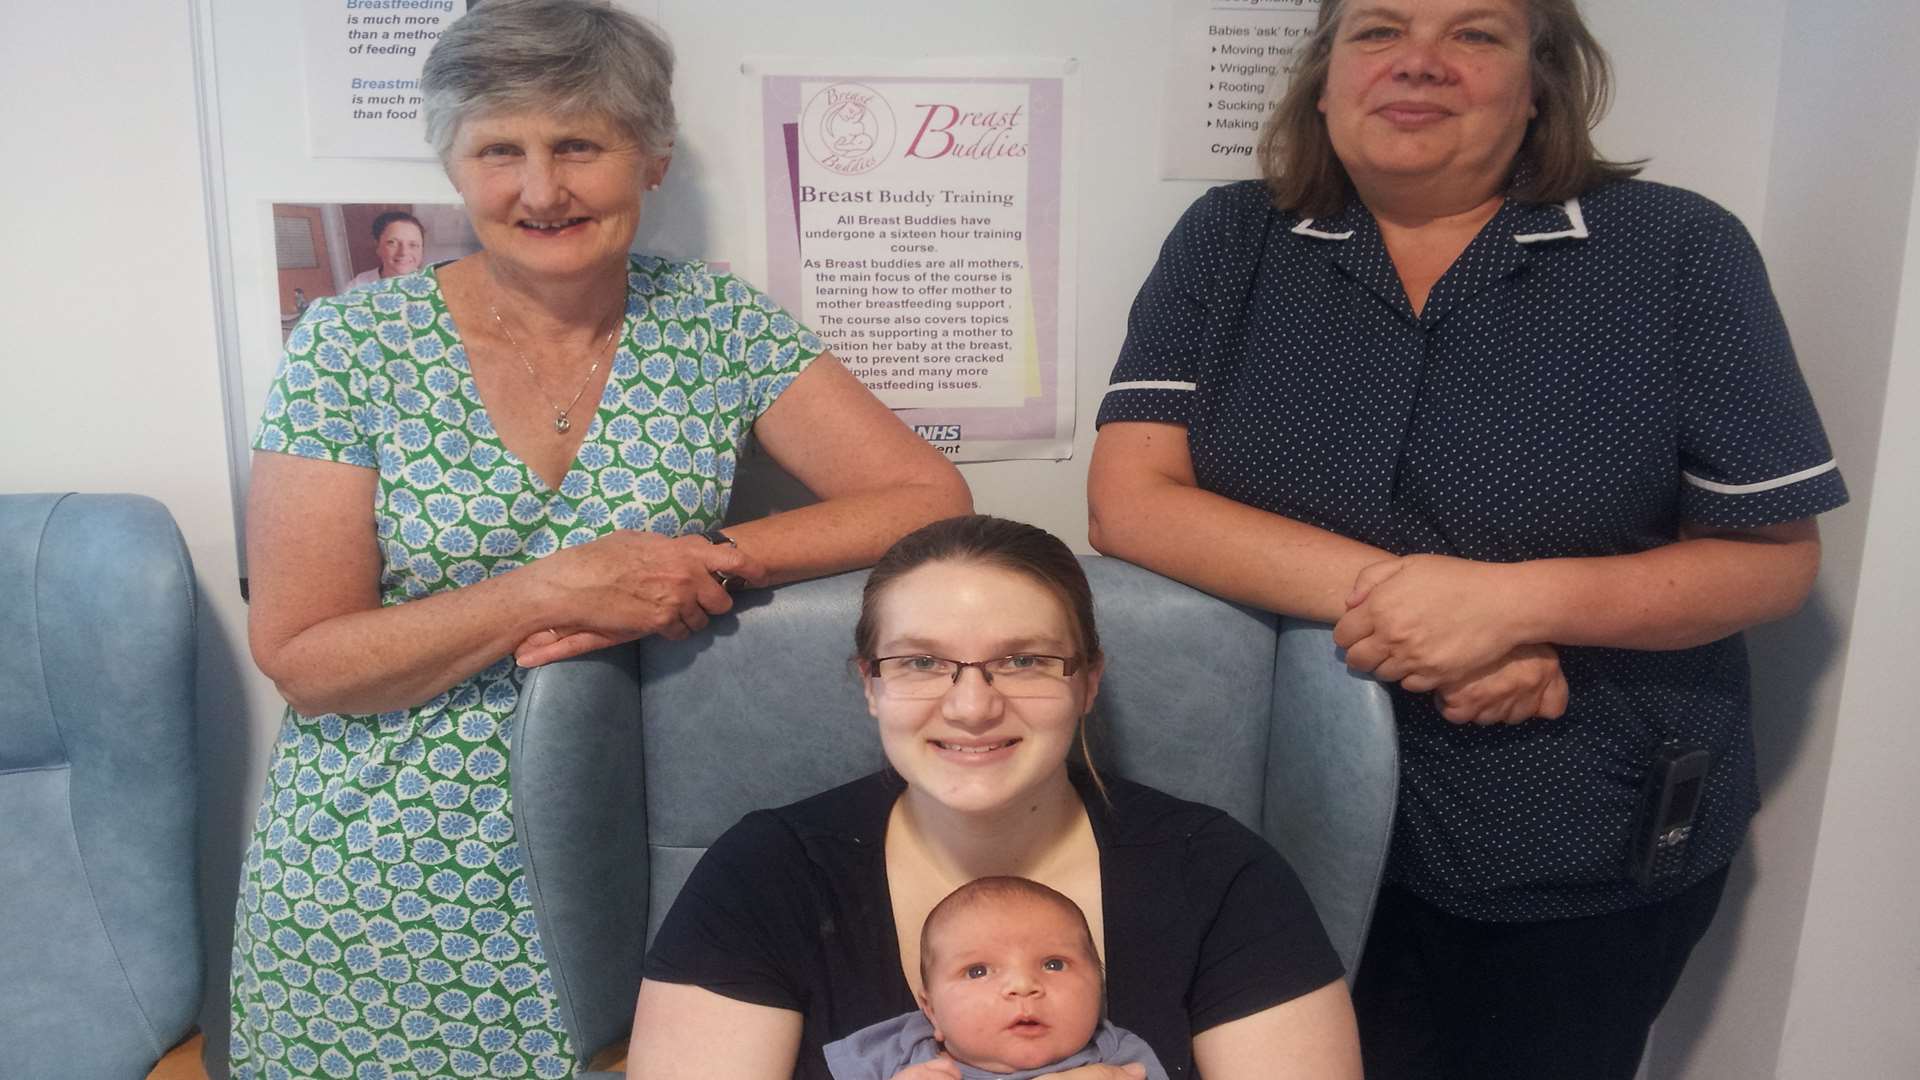 Jane Gerard-Pearse, lactation consultant, mum Emma Dunlop with baby Michael, born Monday June 2 2014, and Jean Meadows in the Tunbridge Wells clinic